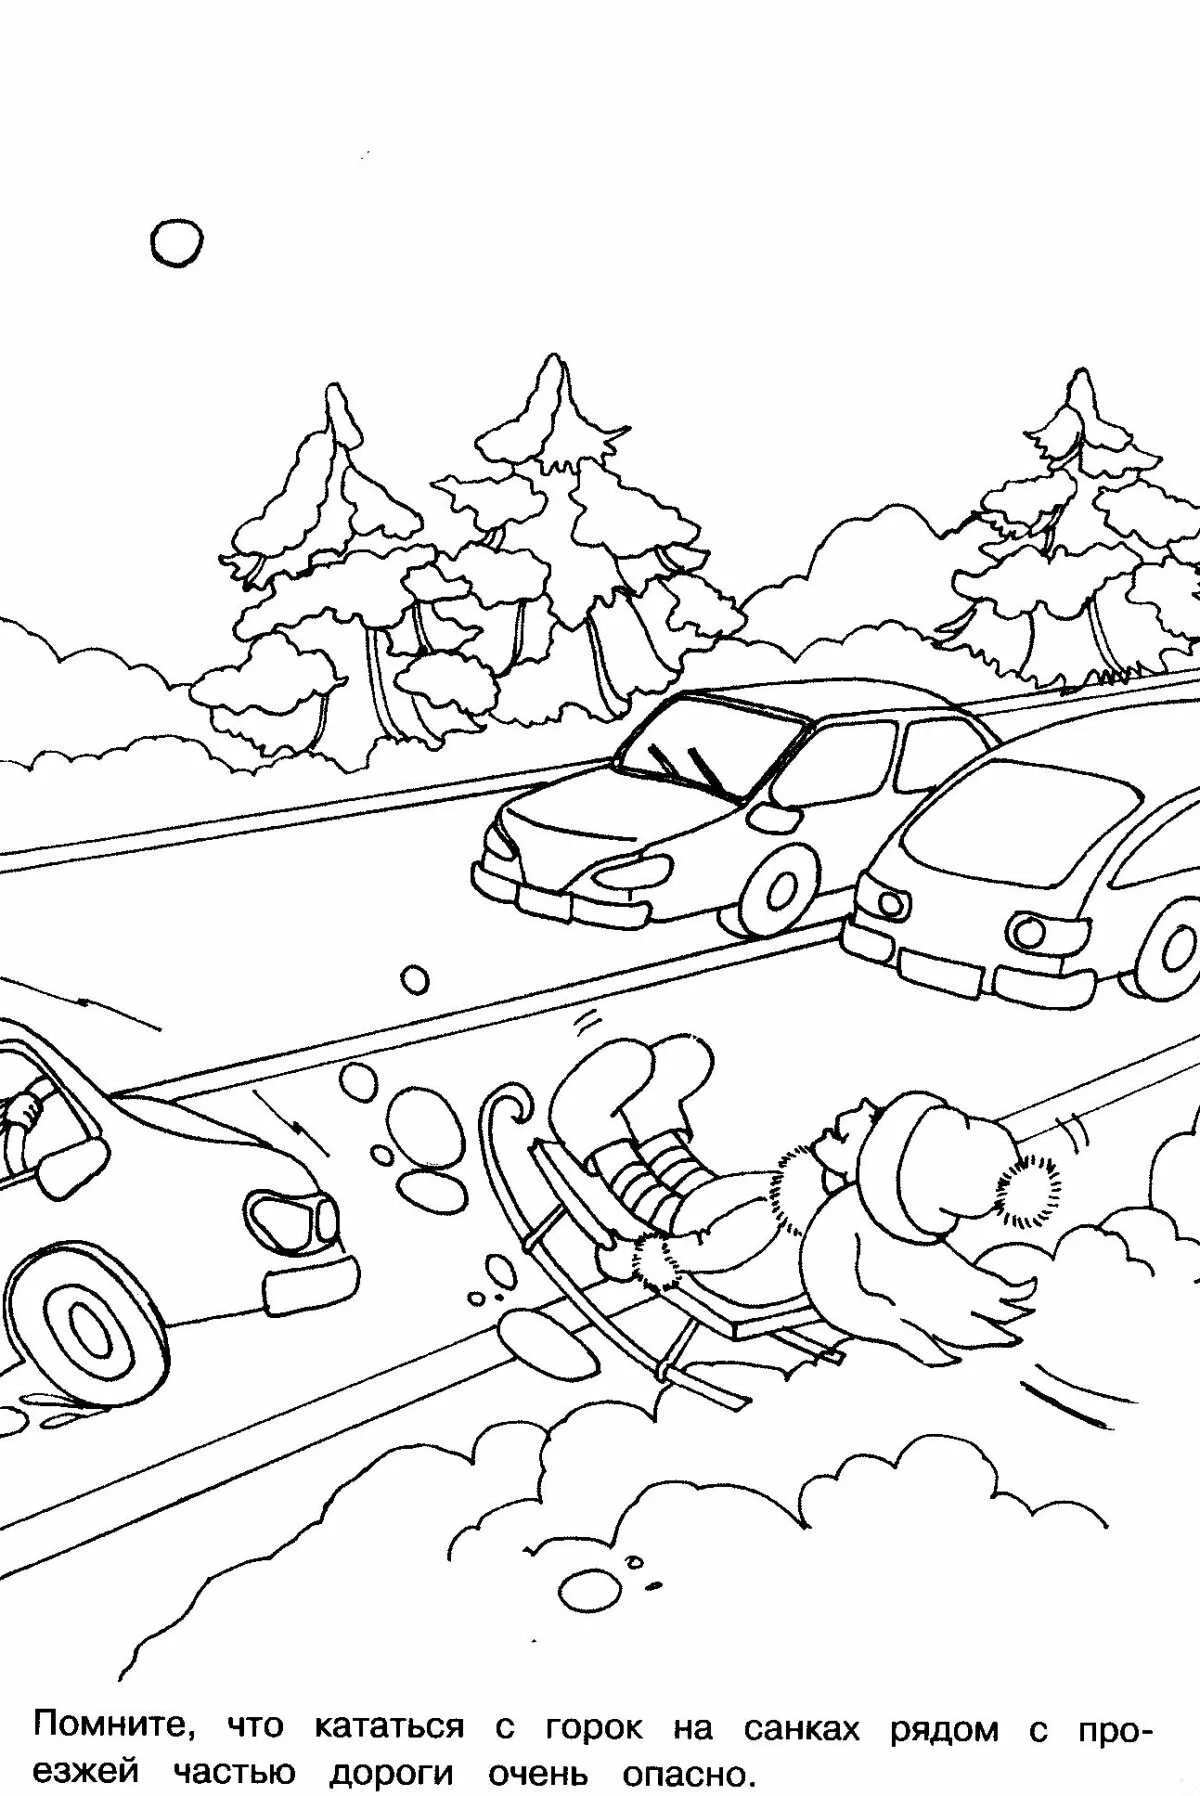 Inviting road of life coloring book for children